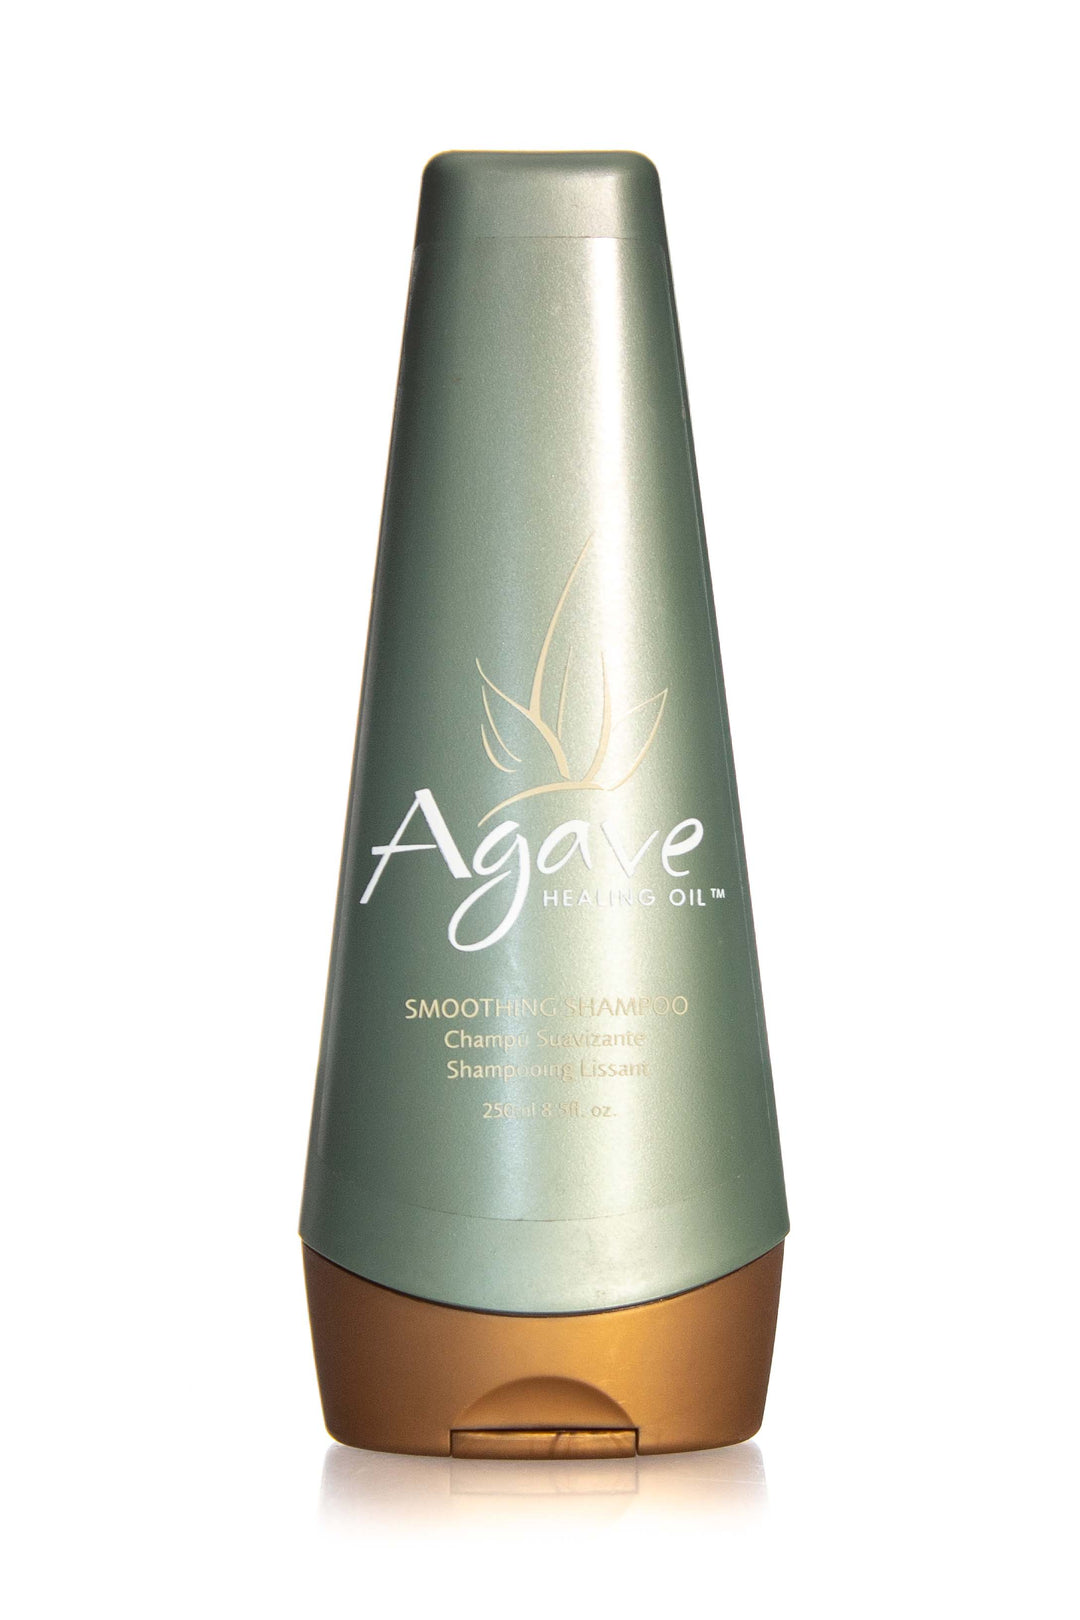 AGAVE Healing Oil Smoothing Shampoo | 250ml